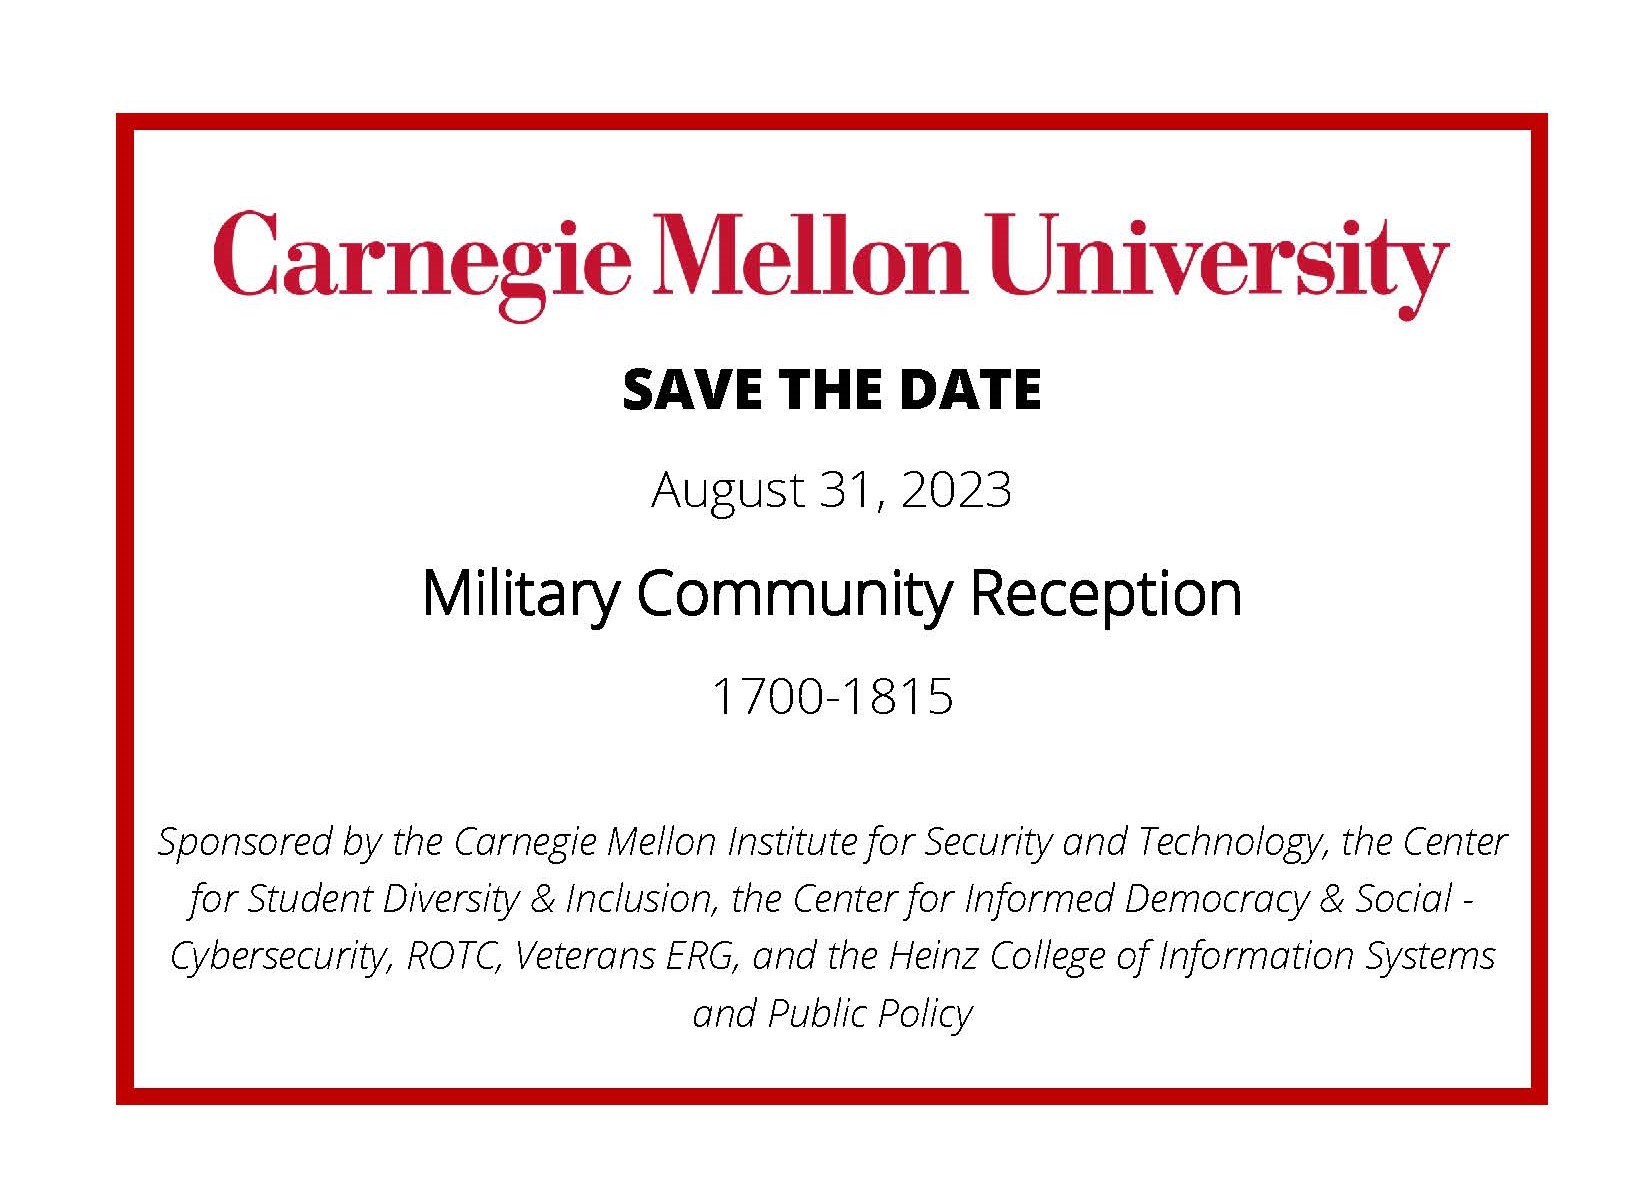 Event poster with text that reads save the date August 31, 2023, Military Community Reception, 1700-1815, sponsored by the Carnegie Mellon Institute for Security and Technology, the Center for Student Diversity and Inclusion, the Center for Informed Democracy and Social Cybersecurity, ROTC Veterans ERG, and the Heinz College of Information Systems and Public Policy